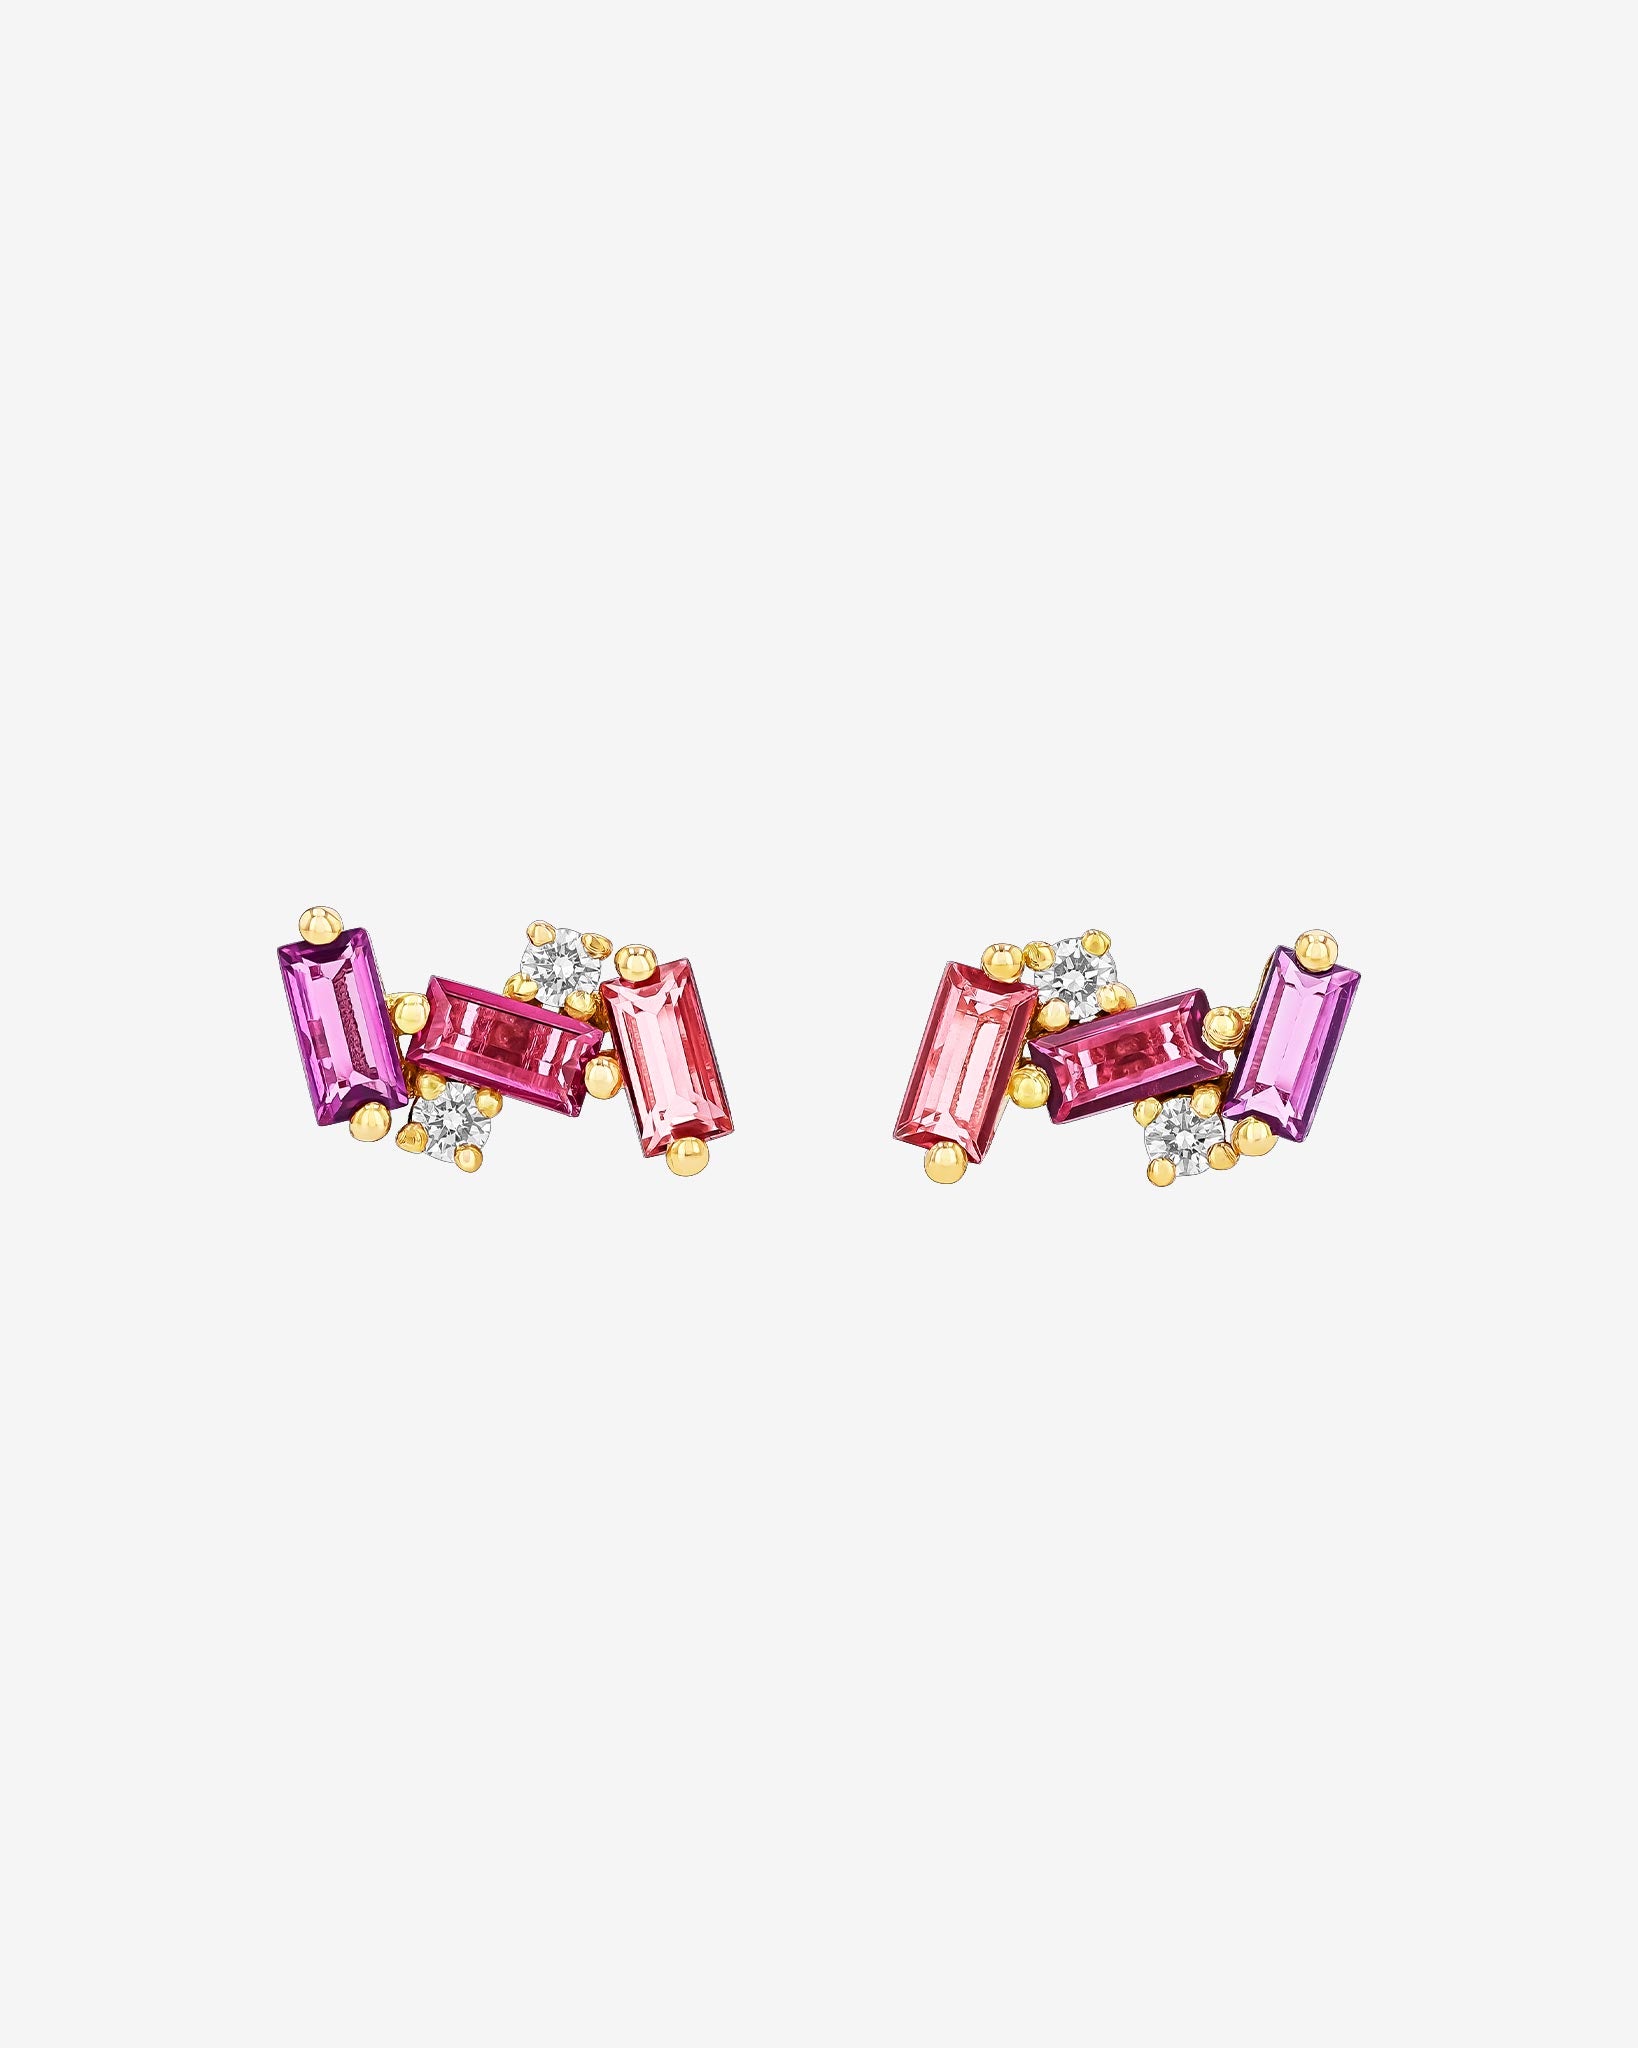 Kalan By Suzanne Kalan Amalfi Burst Red Ombre Studs in 14k yellow gold